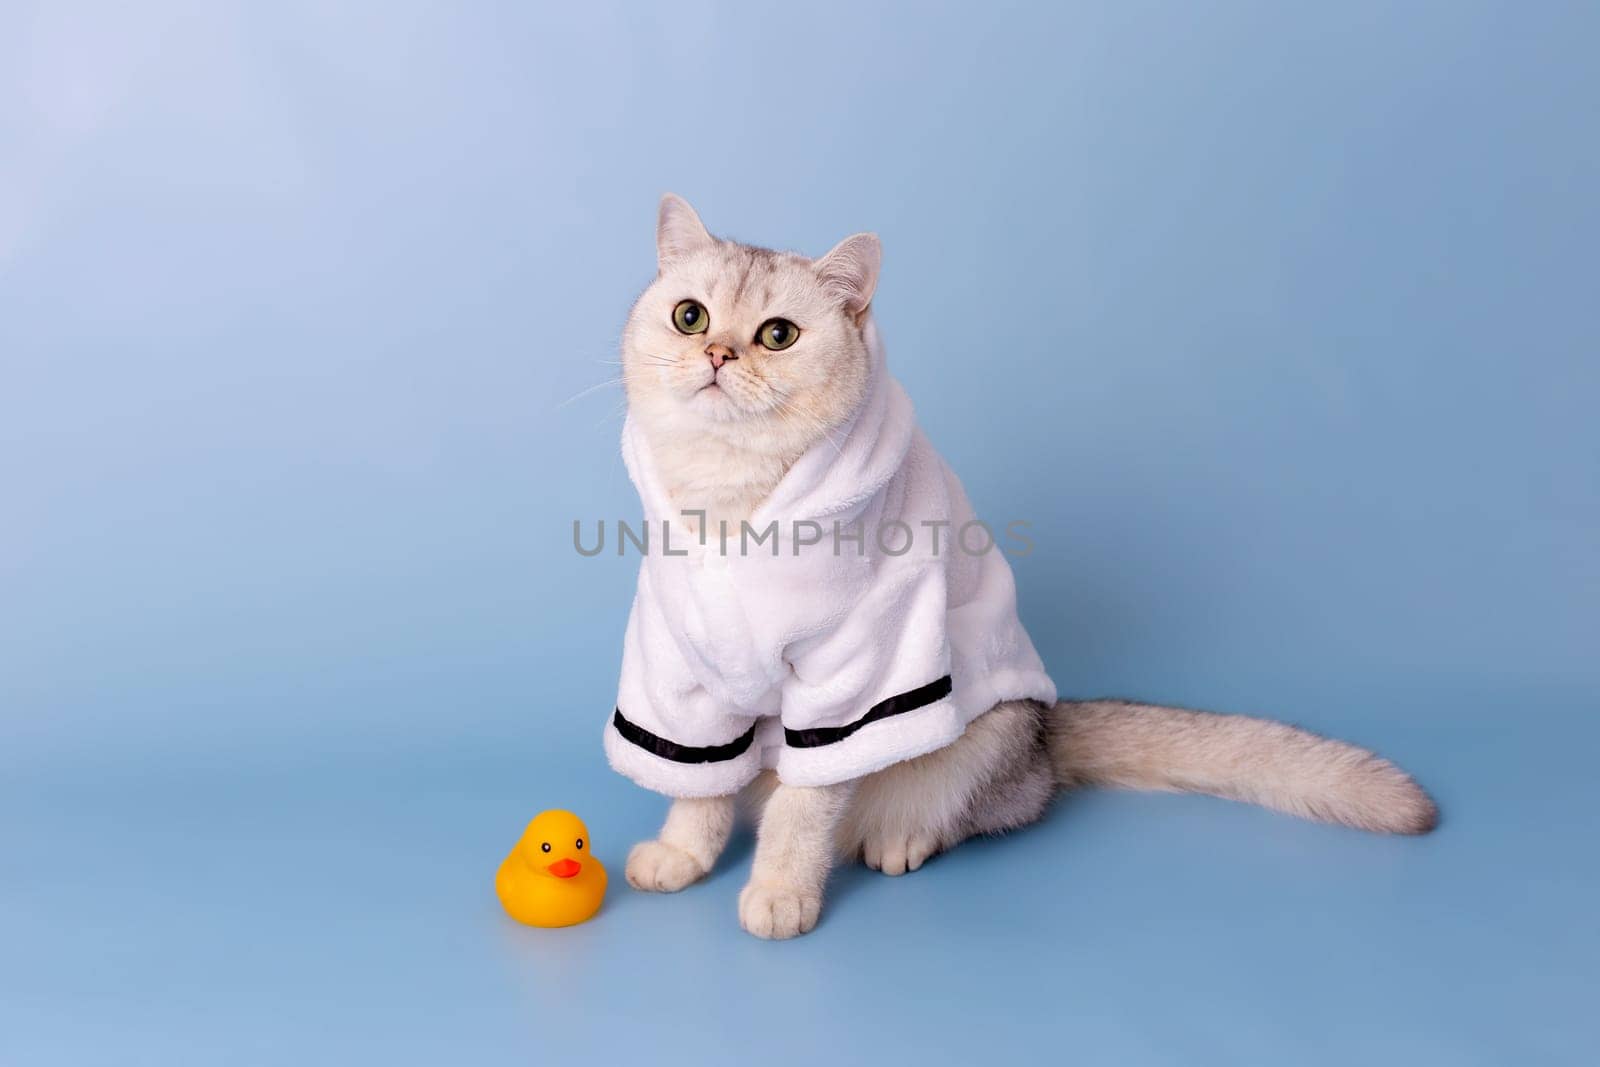 Cute white cat is sitting in a white bathrobe, on a blue background, next to a yellow rubber duck after bathing, looking away. Copy space